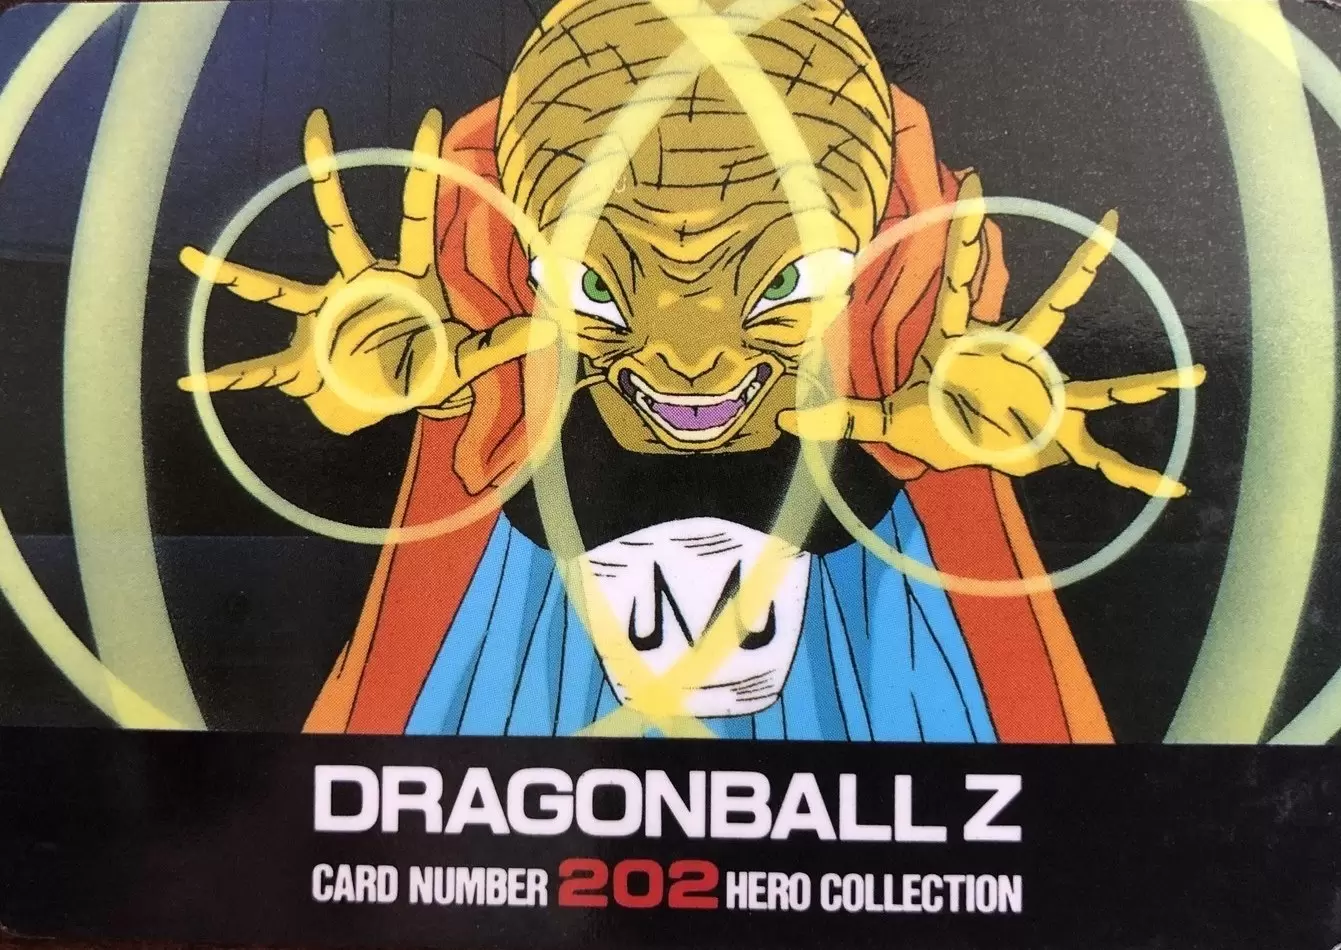 Dragon Ball Z Hero Collection Series Part 2 - Card number 202